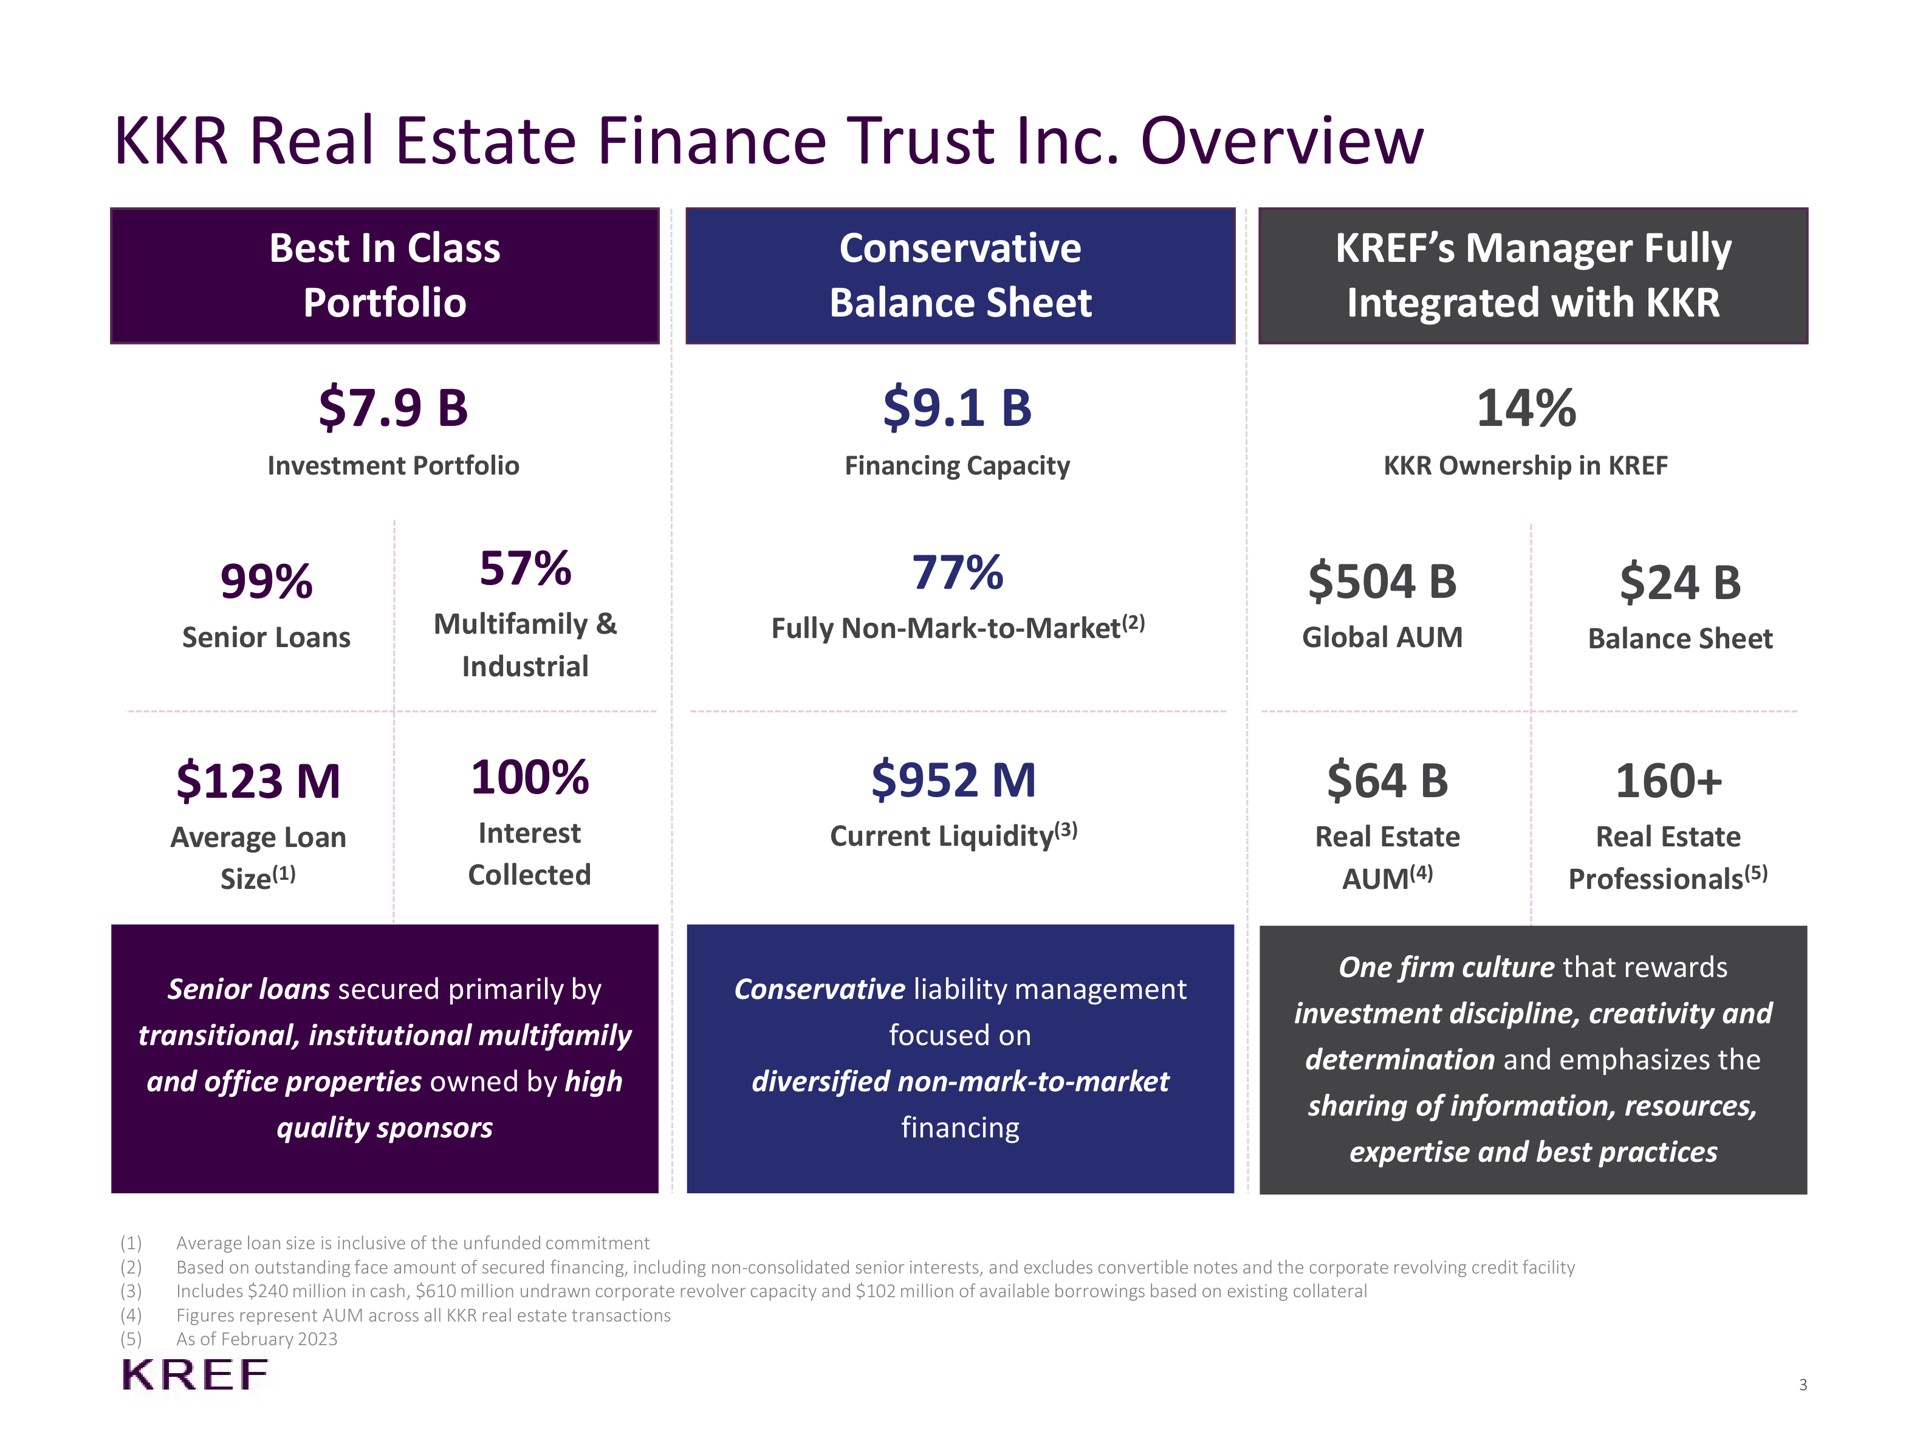 real estate finance trust overview best in class portfolio conservative balance sheet manager fully integrated with senior loans non mark to market global aum | KKR Real Estate Finance Trust